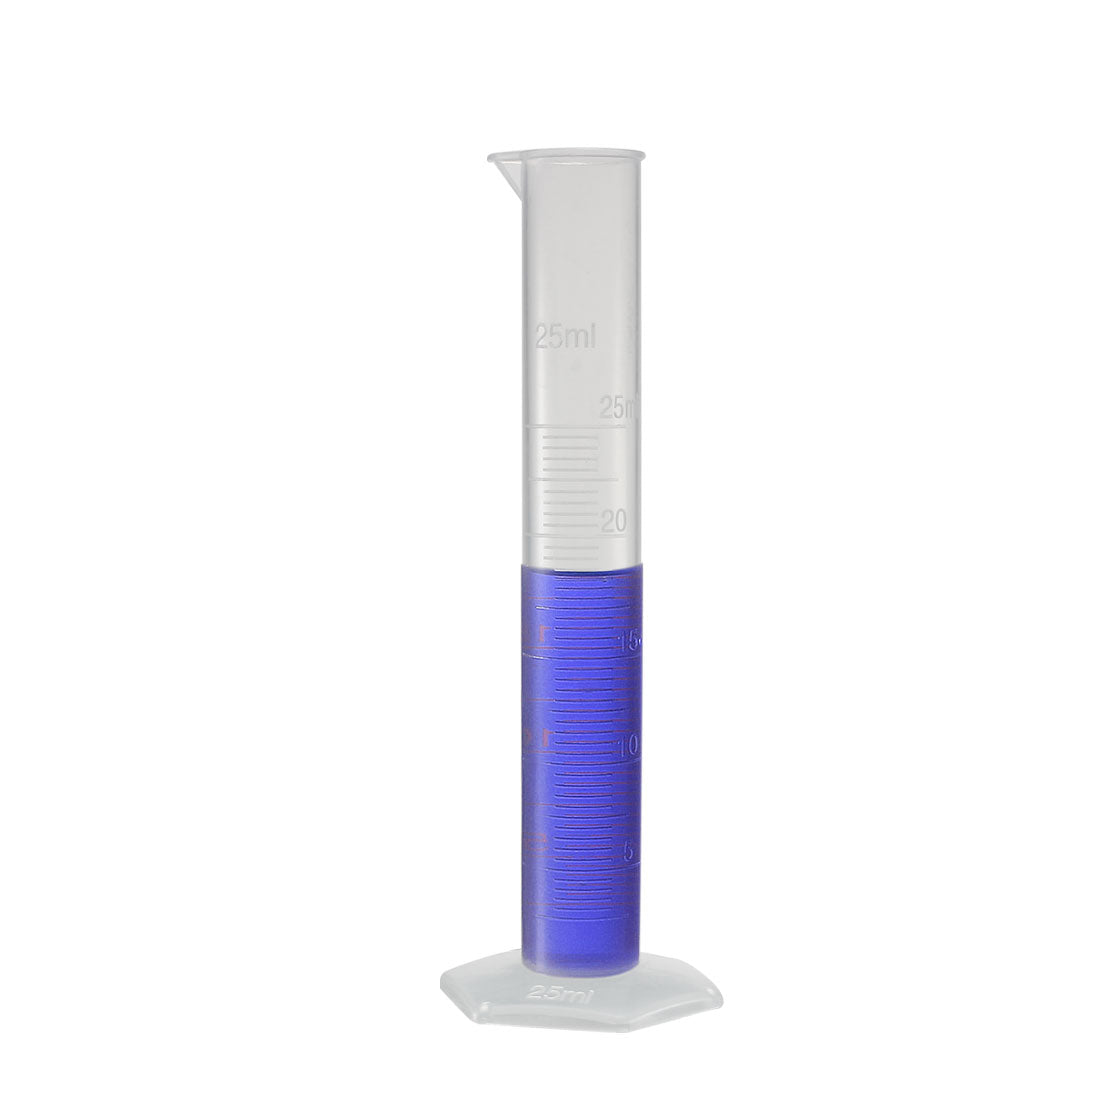 uxcell Uxcell 25ml Laboratory Measurements Clear White Plastic Hex Base Graduated Cylinder for Chemical Measuring 3 Pcs